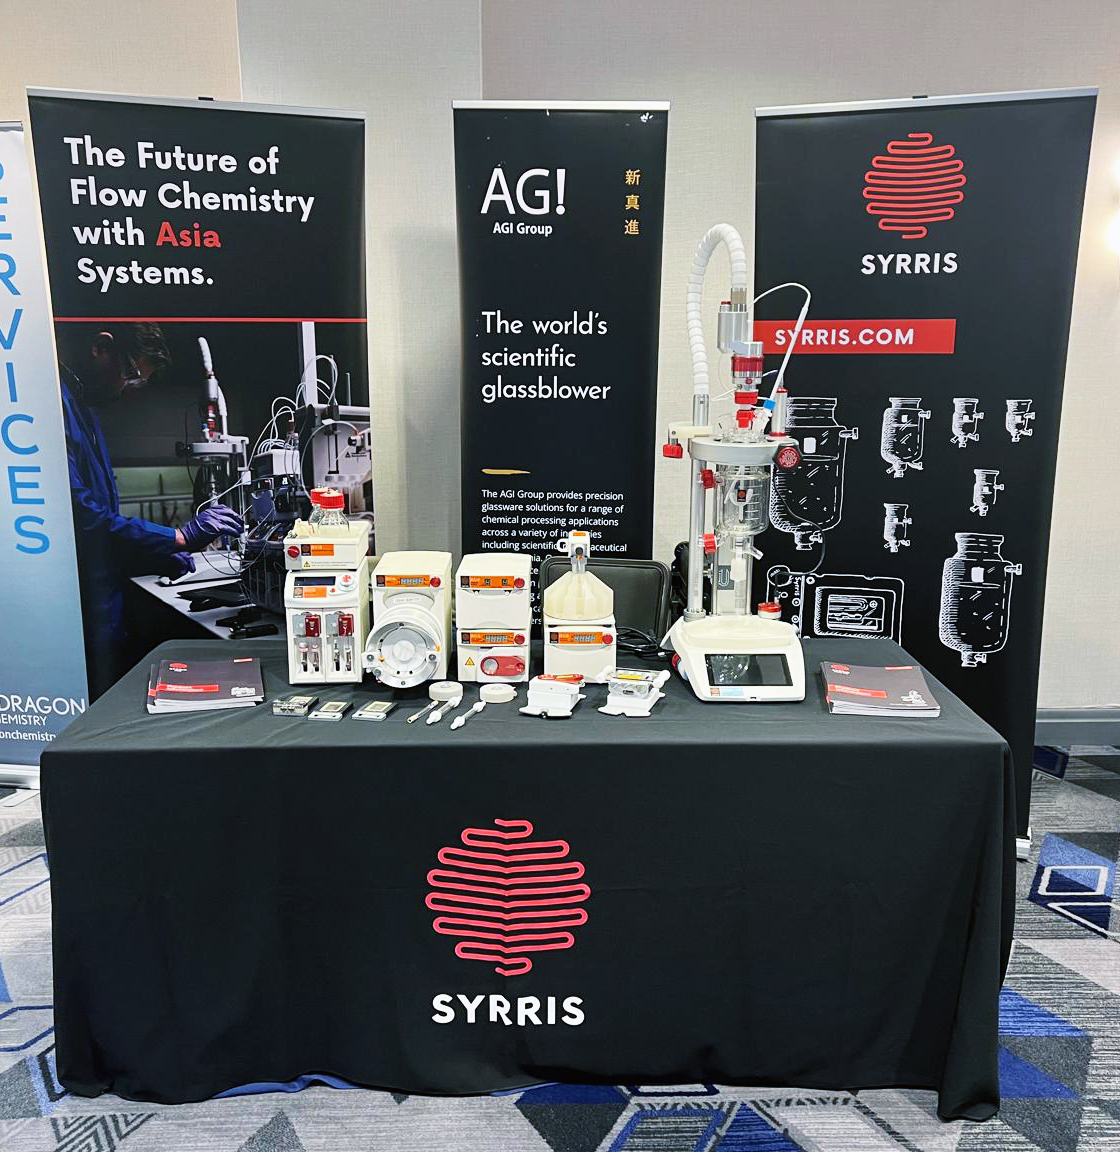 We're in Boston, USA for the 6th Flow Chemistry & Continuous Processing Conference. Good to be among experts, researchers, & industry leaders in chemistry & chemical engineering, discussing the latest advancements in #flowchemistry & continuous processing techniques. @SciUp